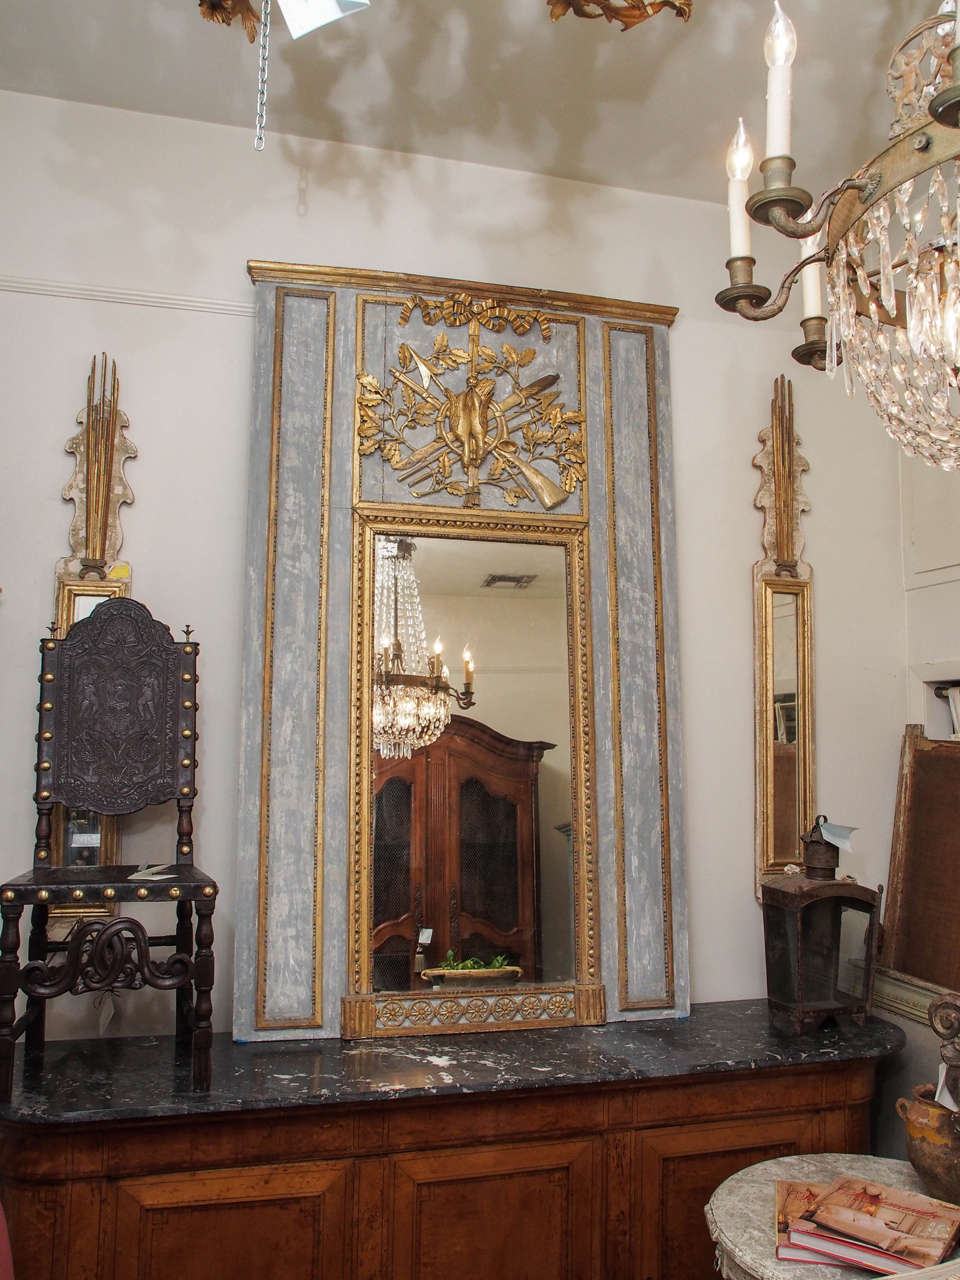 18th century Louis XVI gilt wood trumeau mirror with a bird hunting theme cartouche. Refreshed paint.